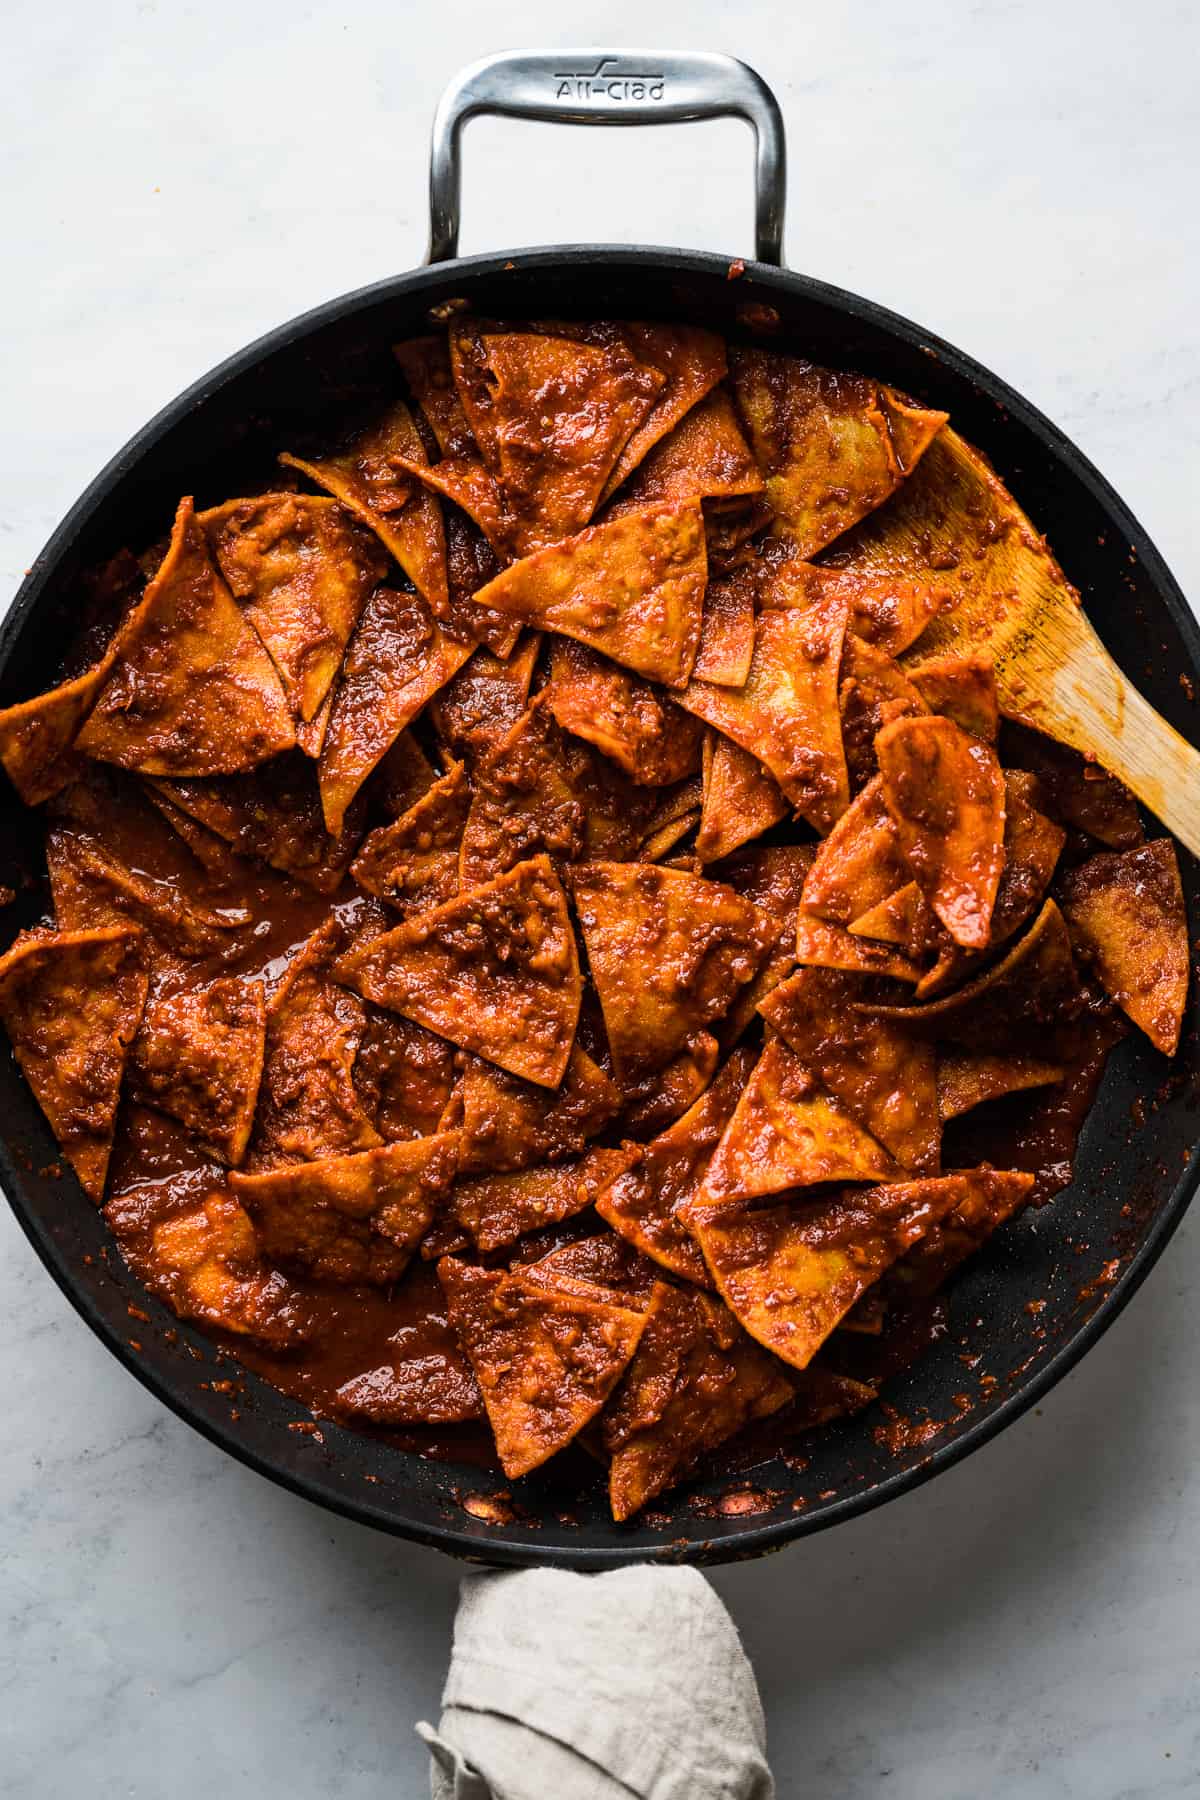 Fried tortilla chips tossed in a red sauce to make chilaquiles.